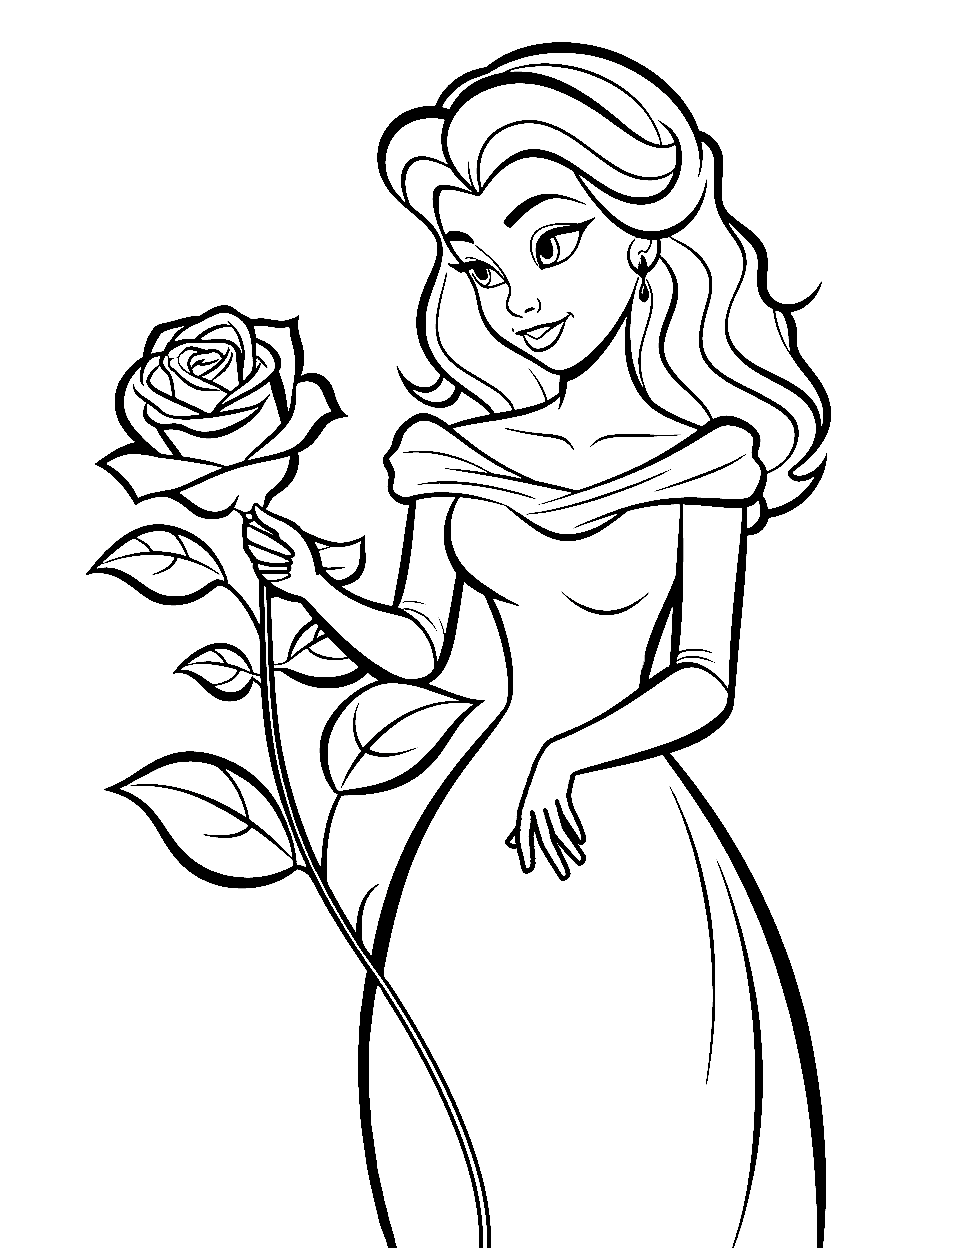 Rose coloring pages free printable sheets